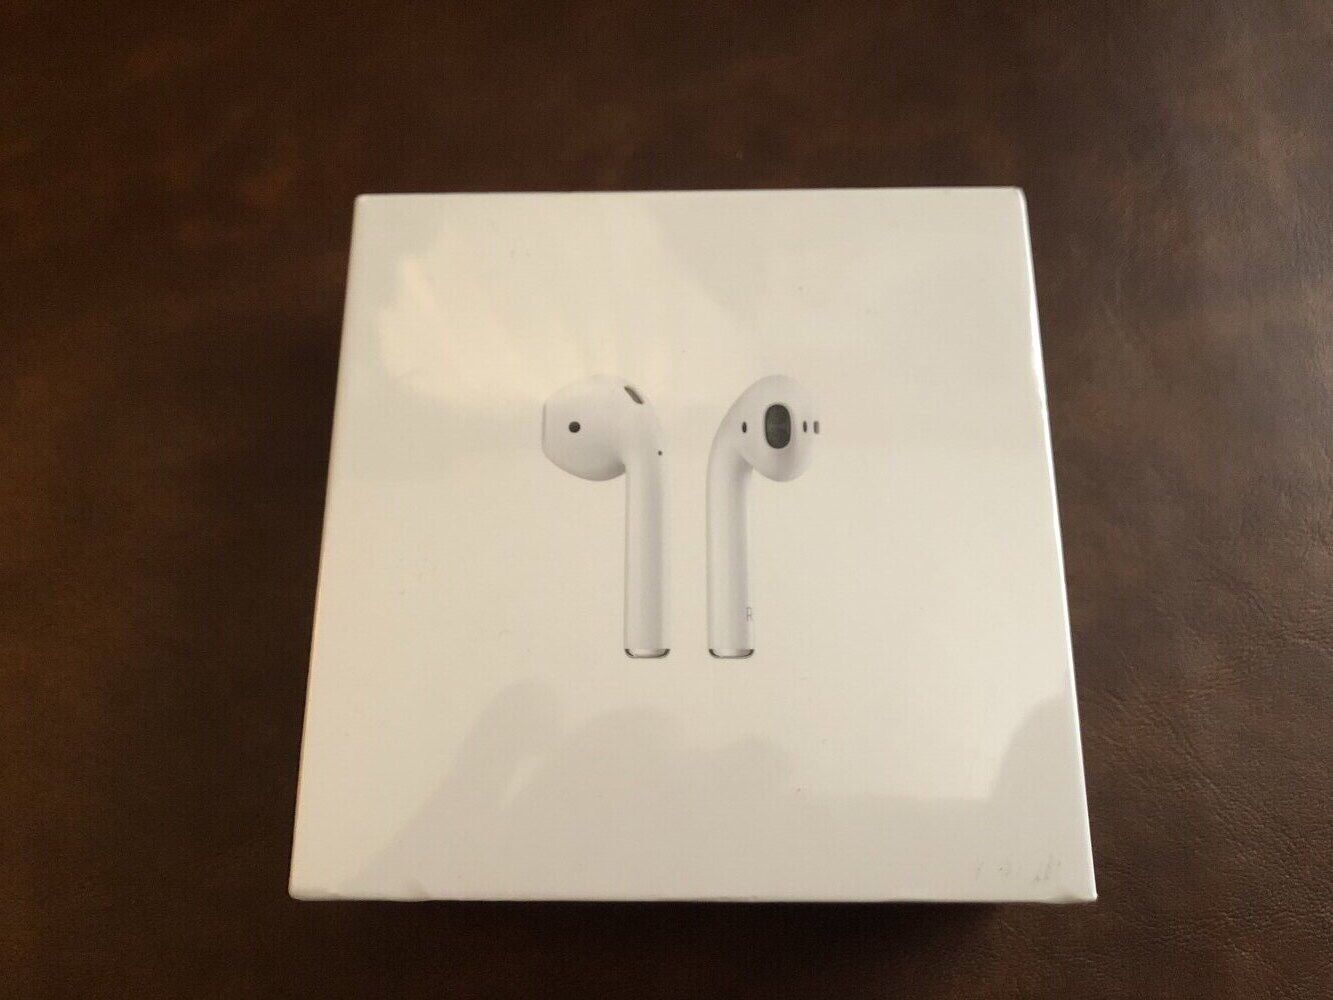 Apple AirPods Generation 2 w/ charging case